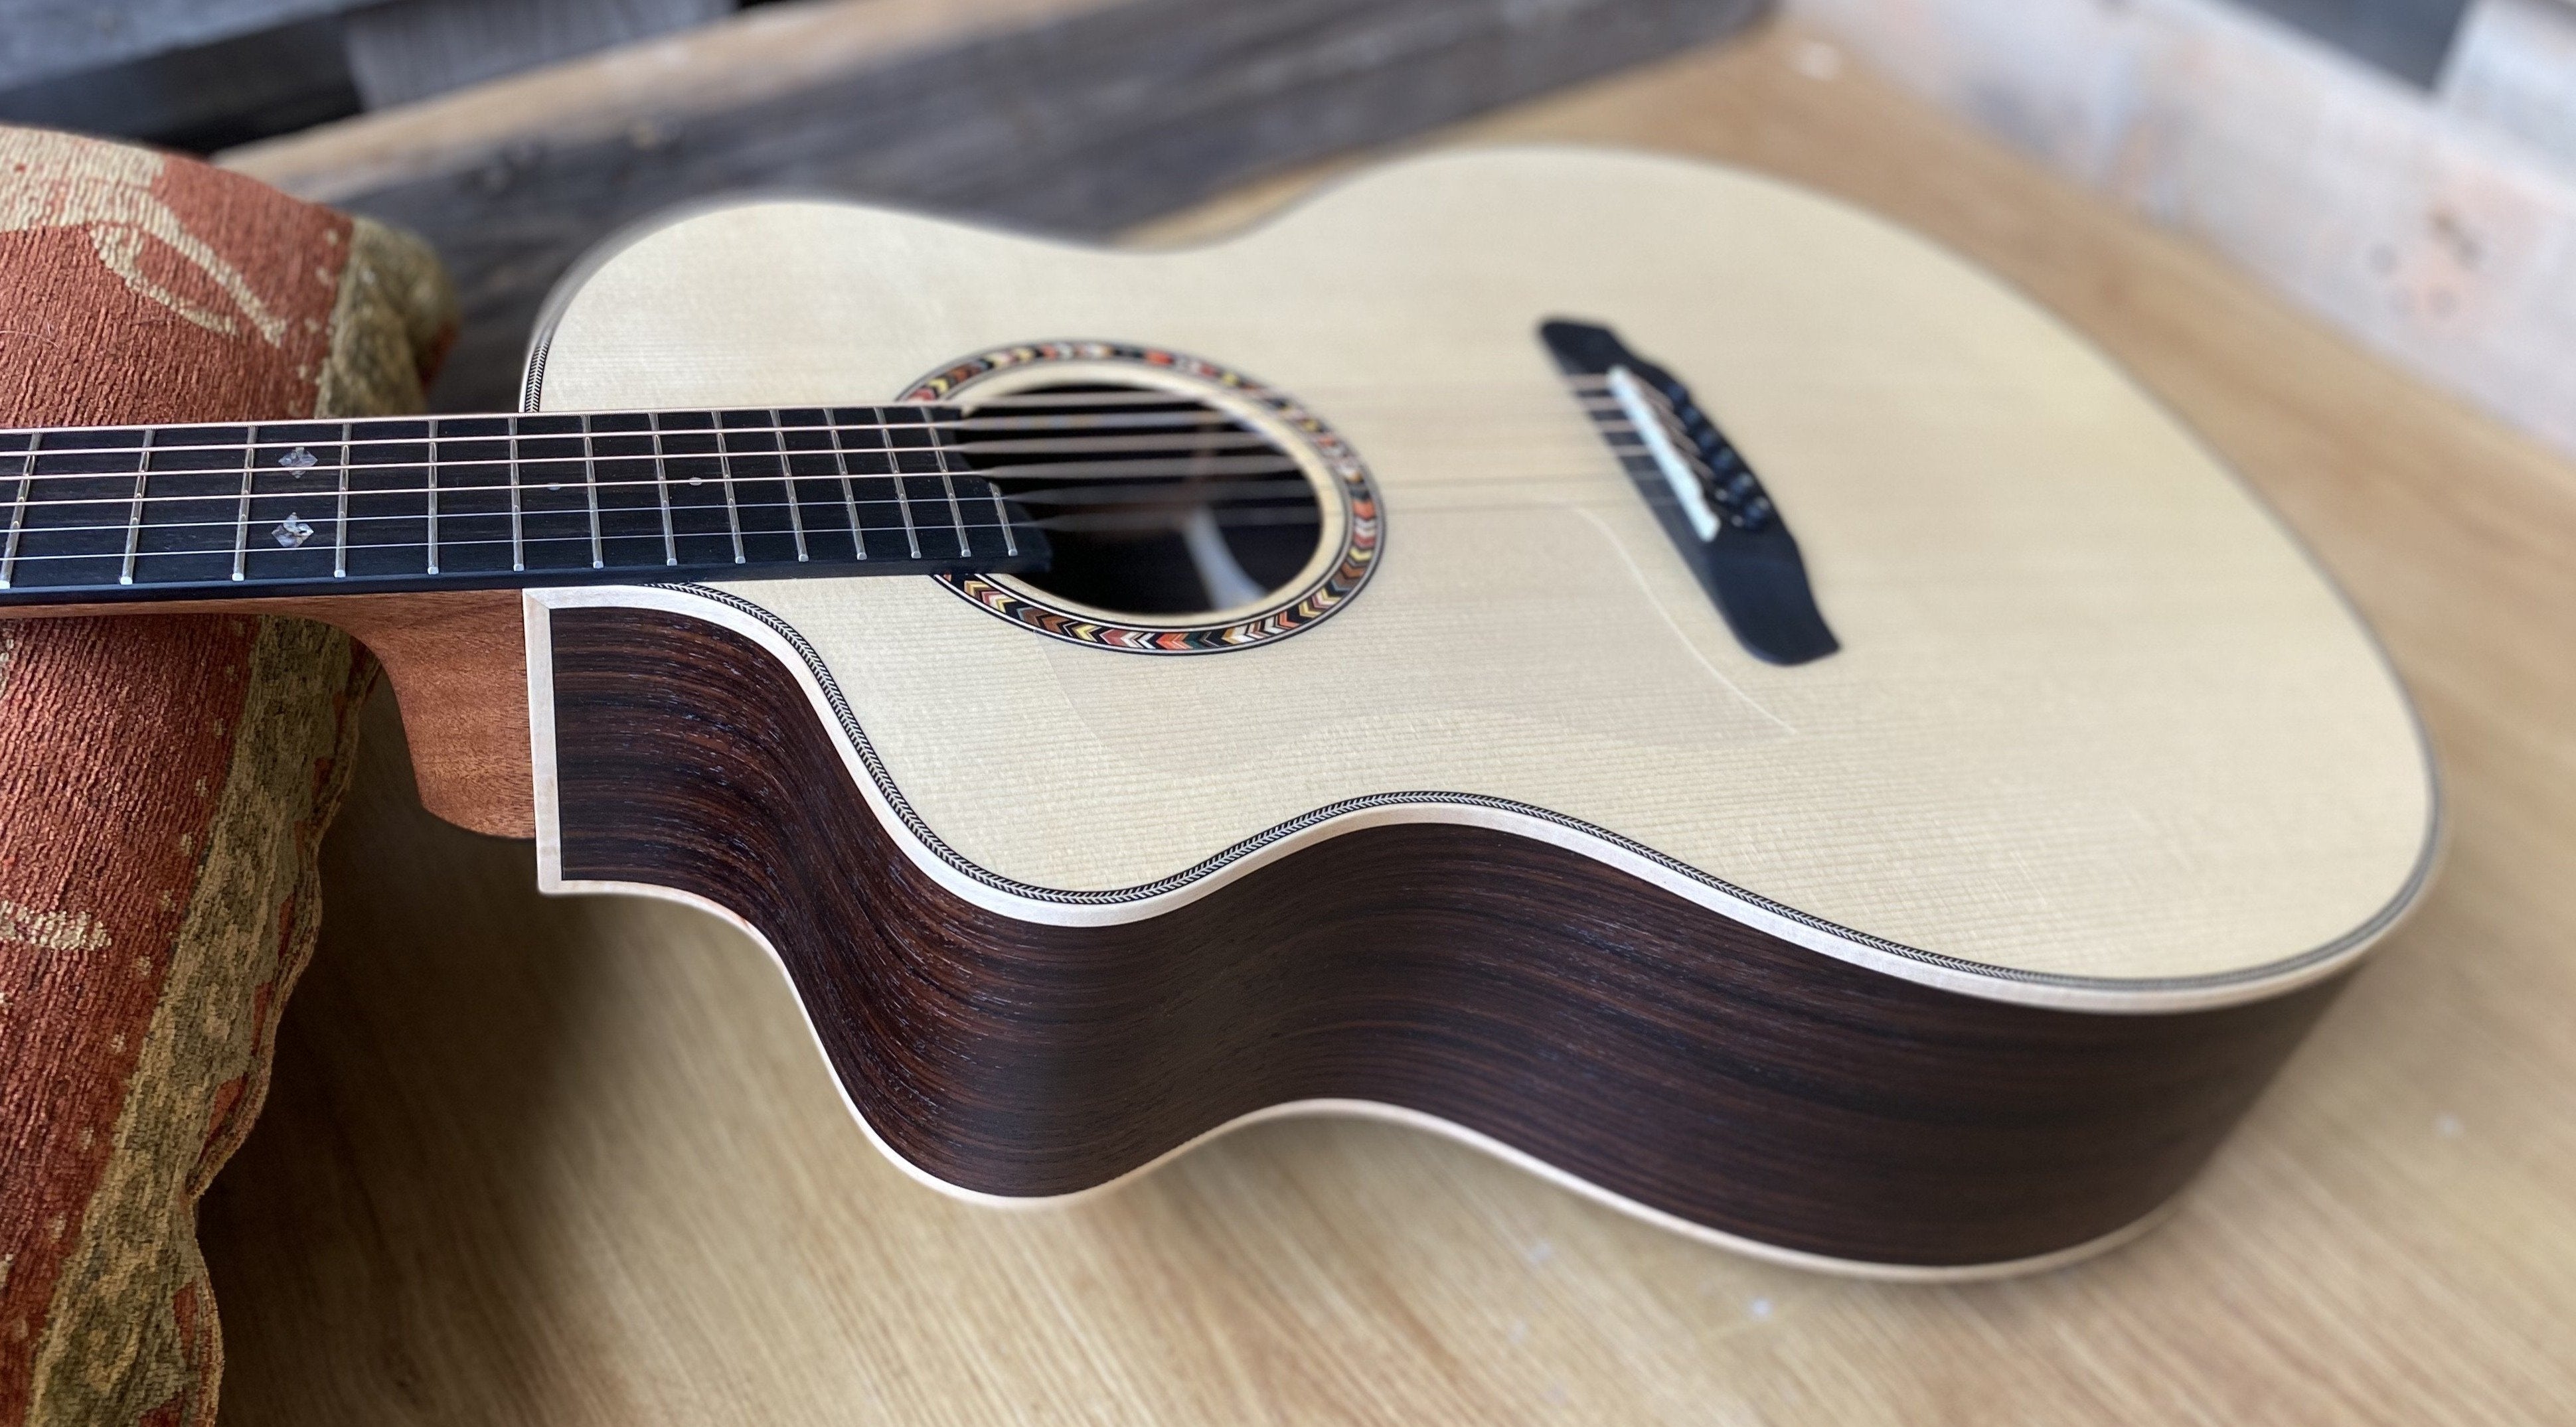 Dowina Rosewood (Ceres) Dolomite Spruce Cutawatay Left Handed, Acoustic Guitar for sale at Richards Guitars.